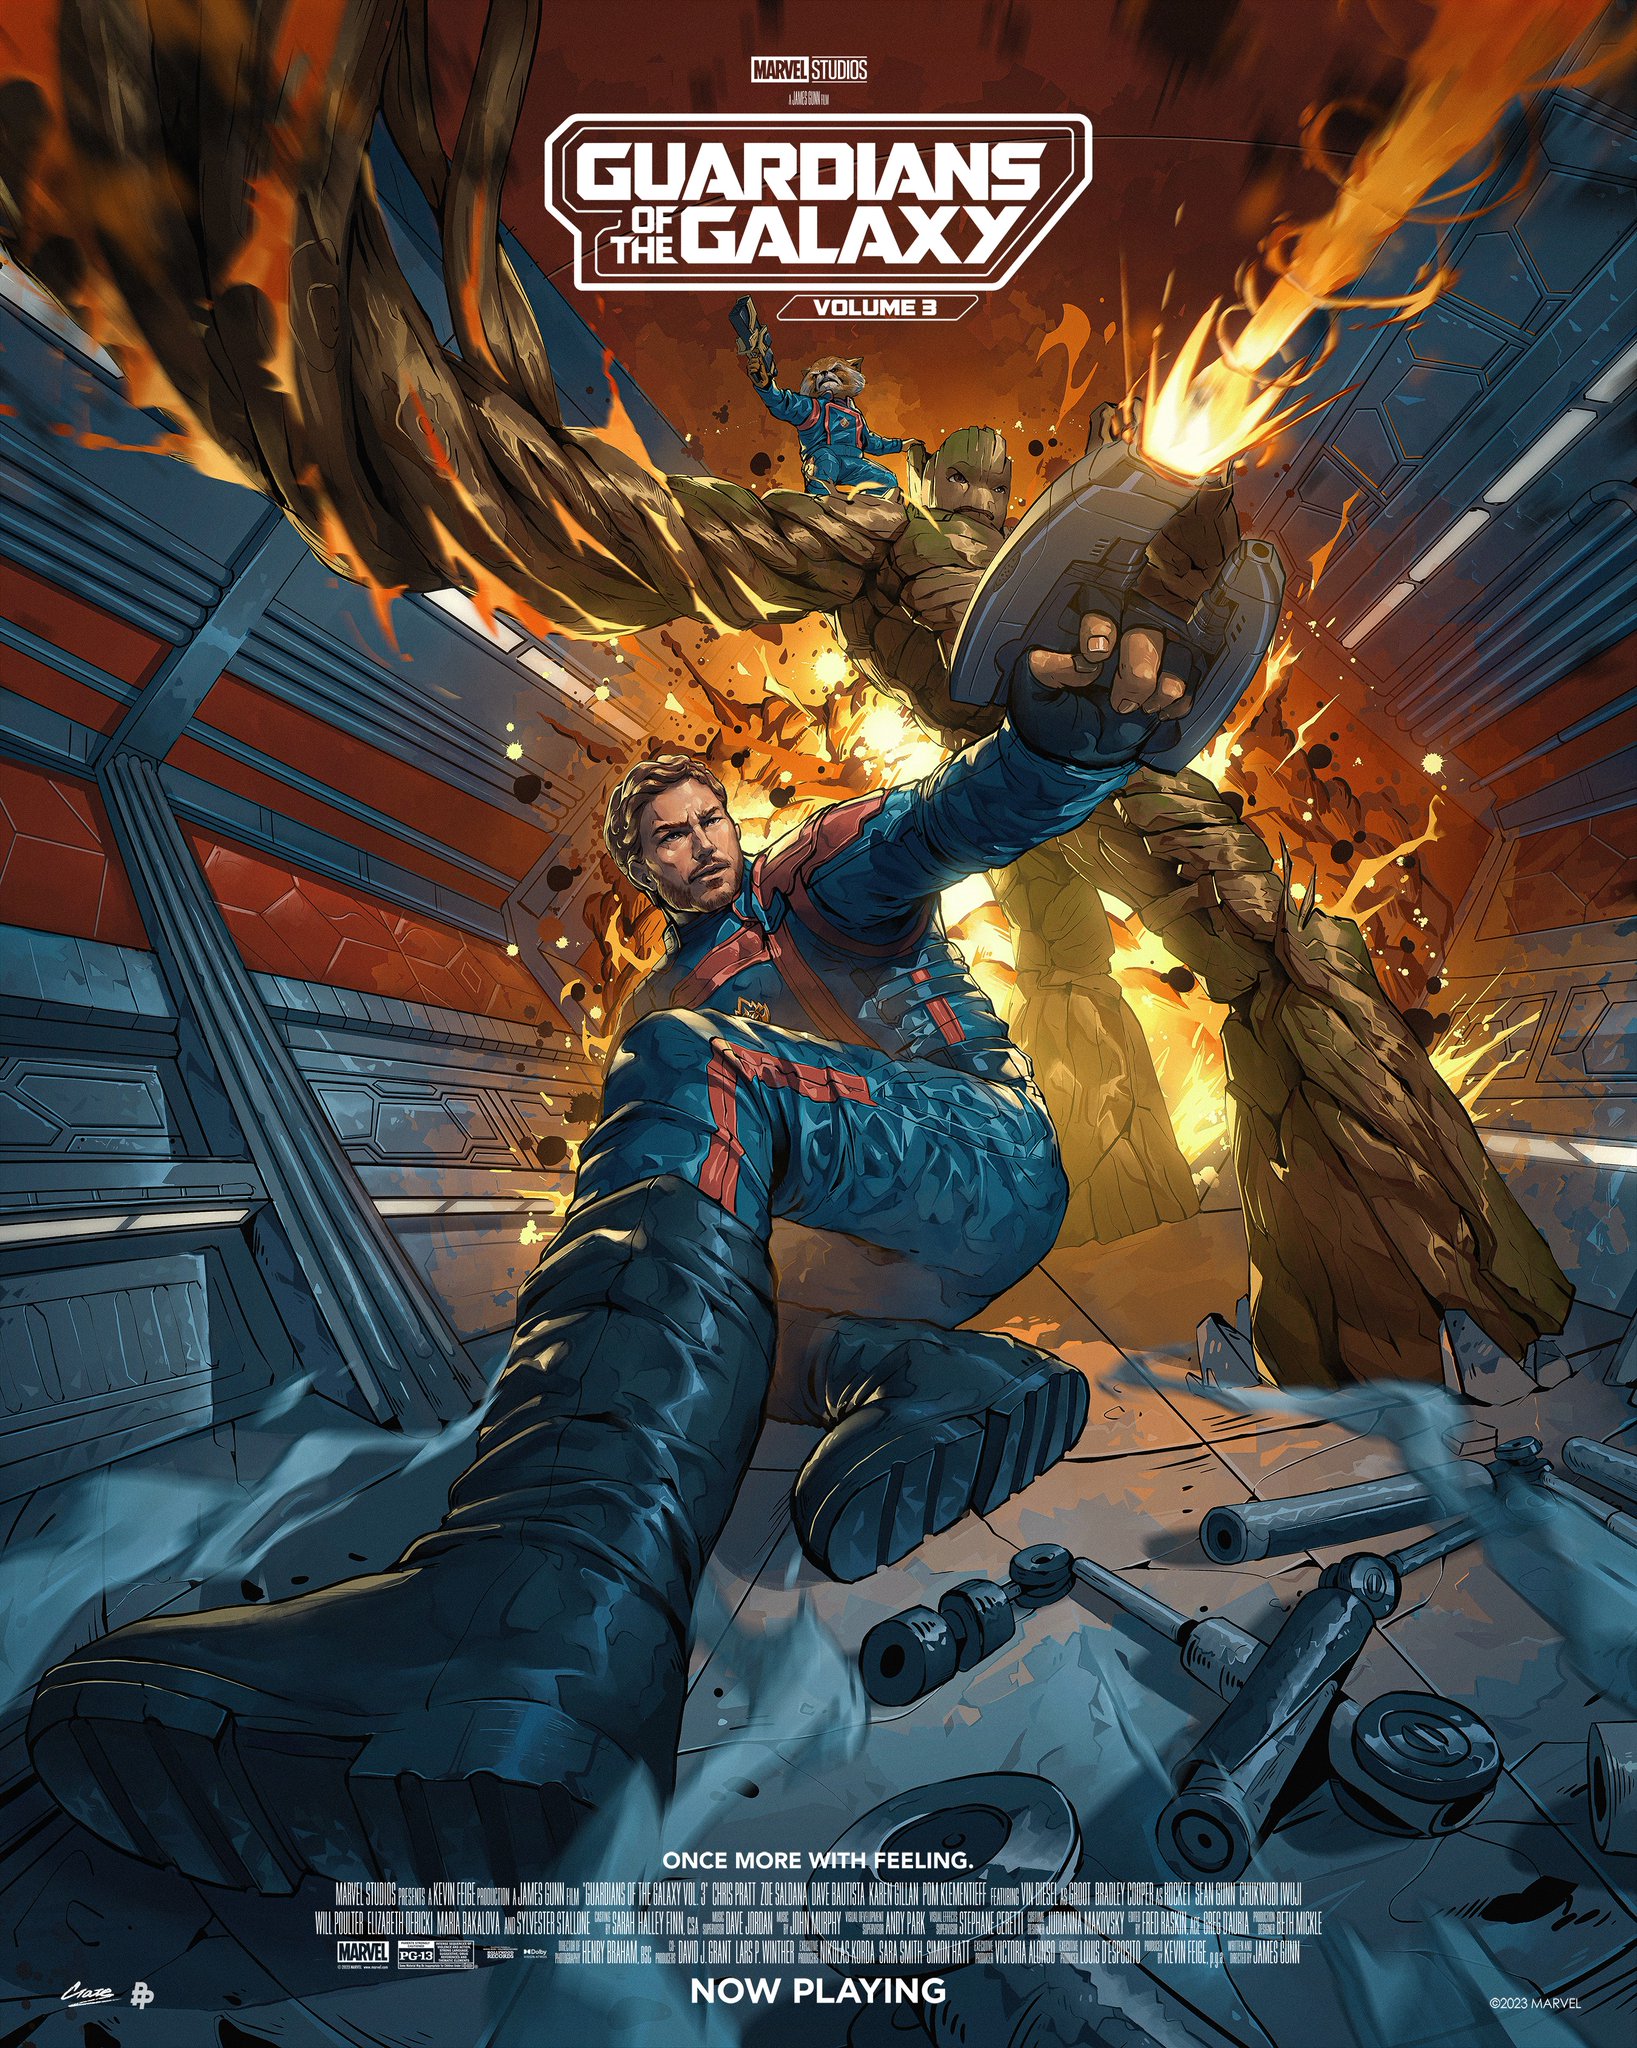 Creatieve Guardians of the Galaxy vol. 3 posters